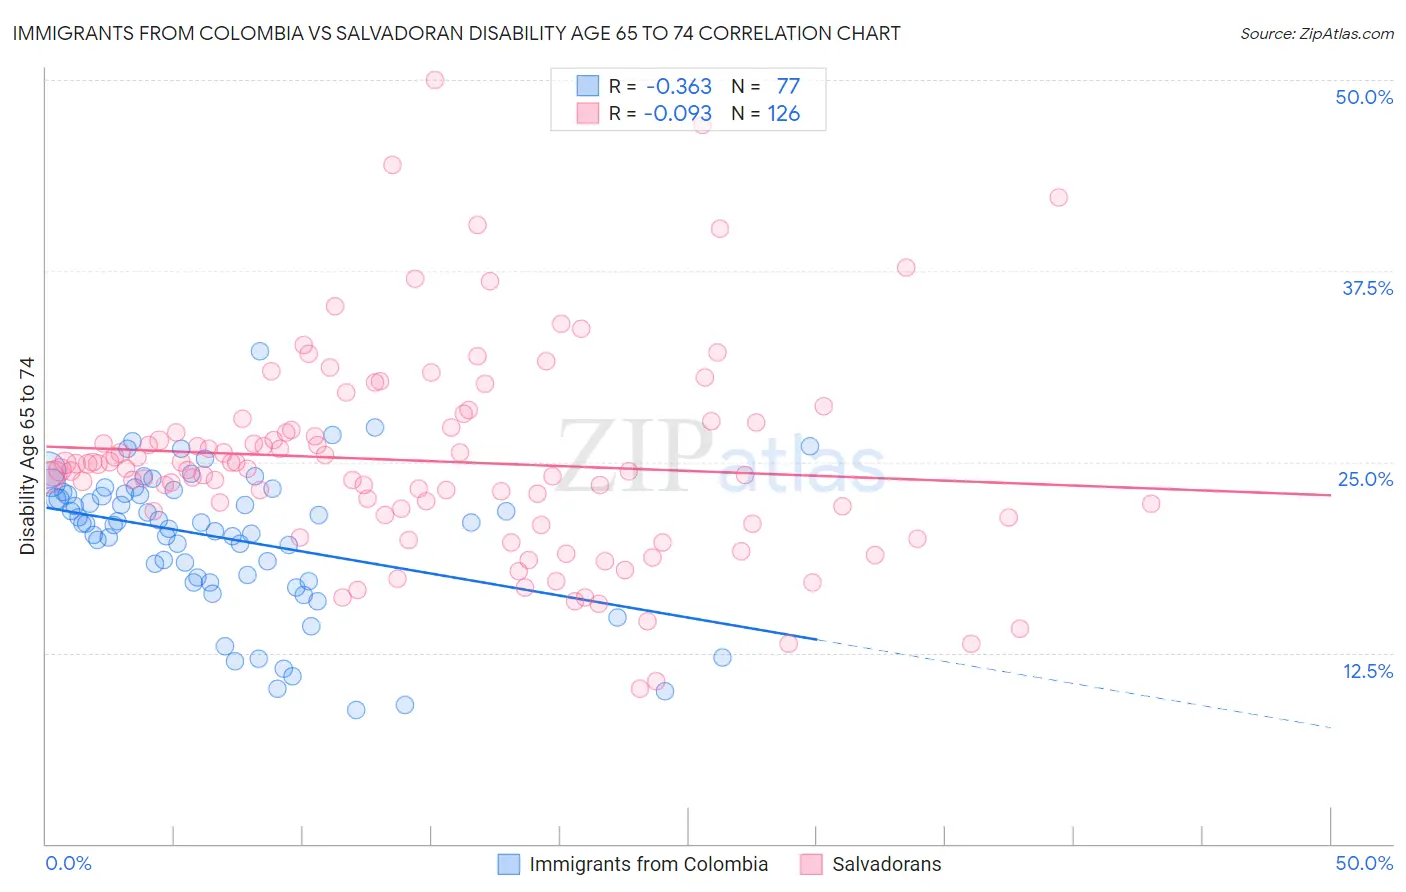 Immigrants from Colombia vs Salvadoran Disability Age 65 to 74